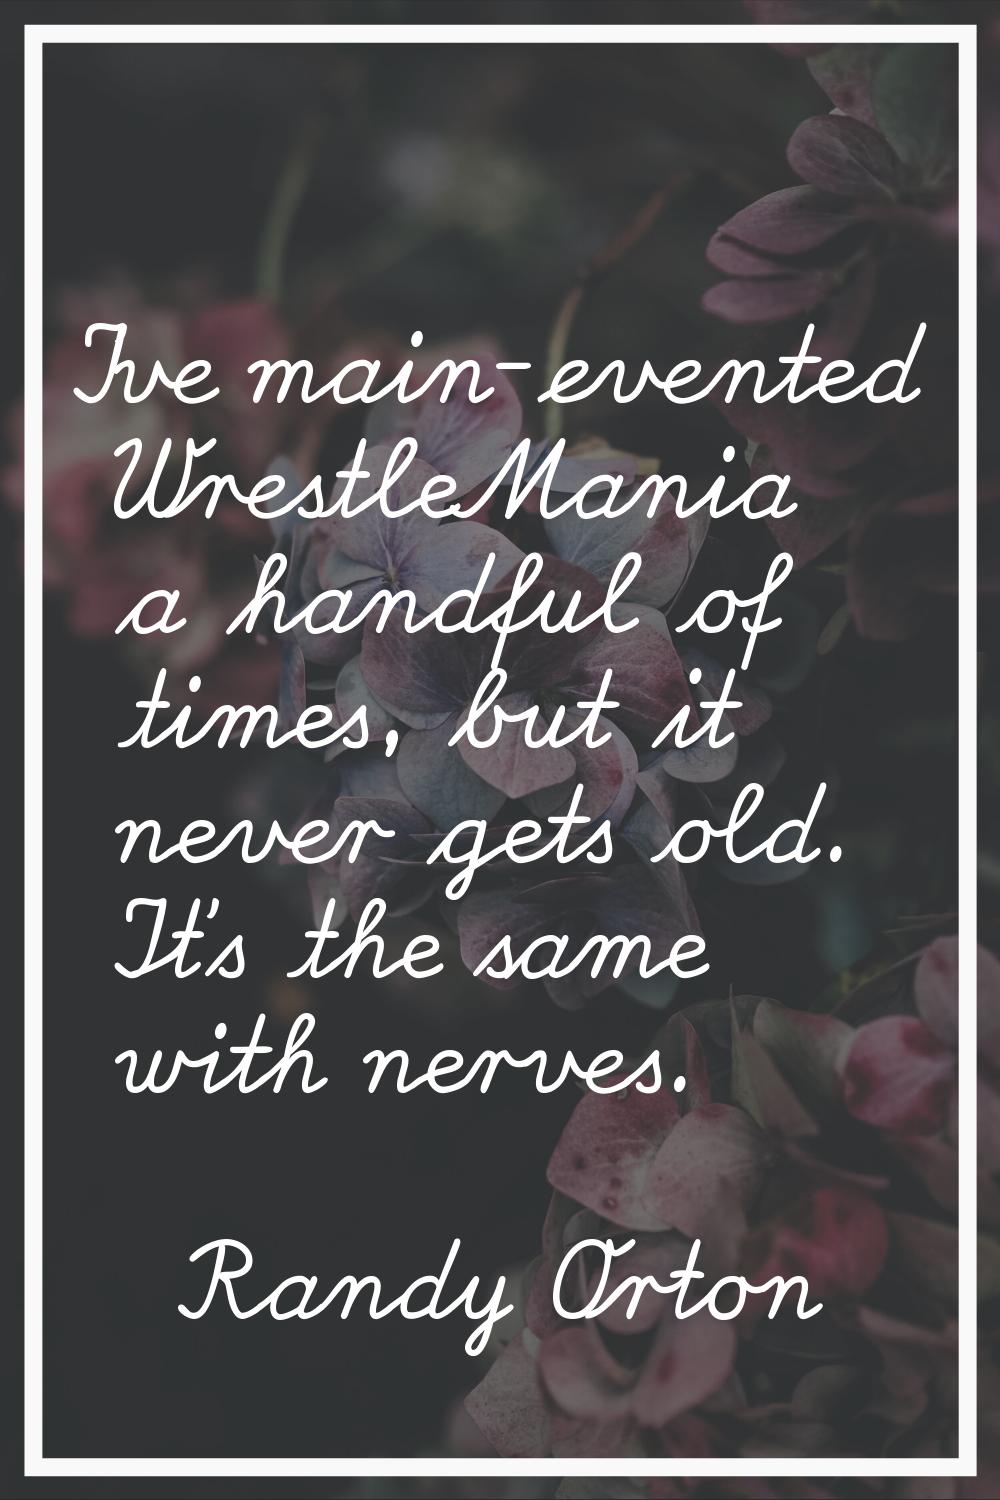 I've main-evented WrestleMania a handful of times, but it never gets old. It's the same with nerves